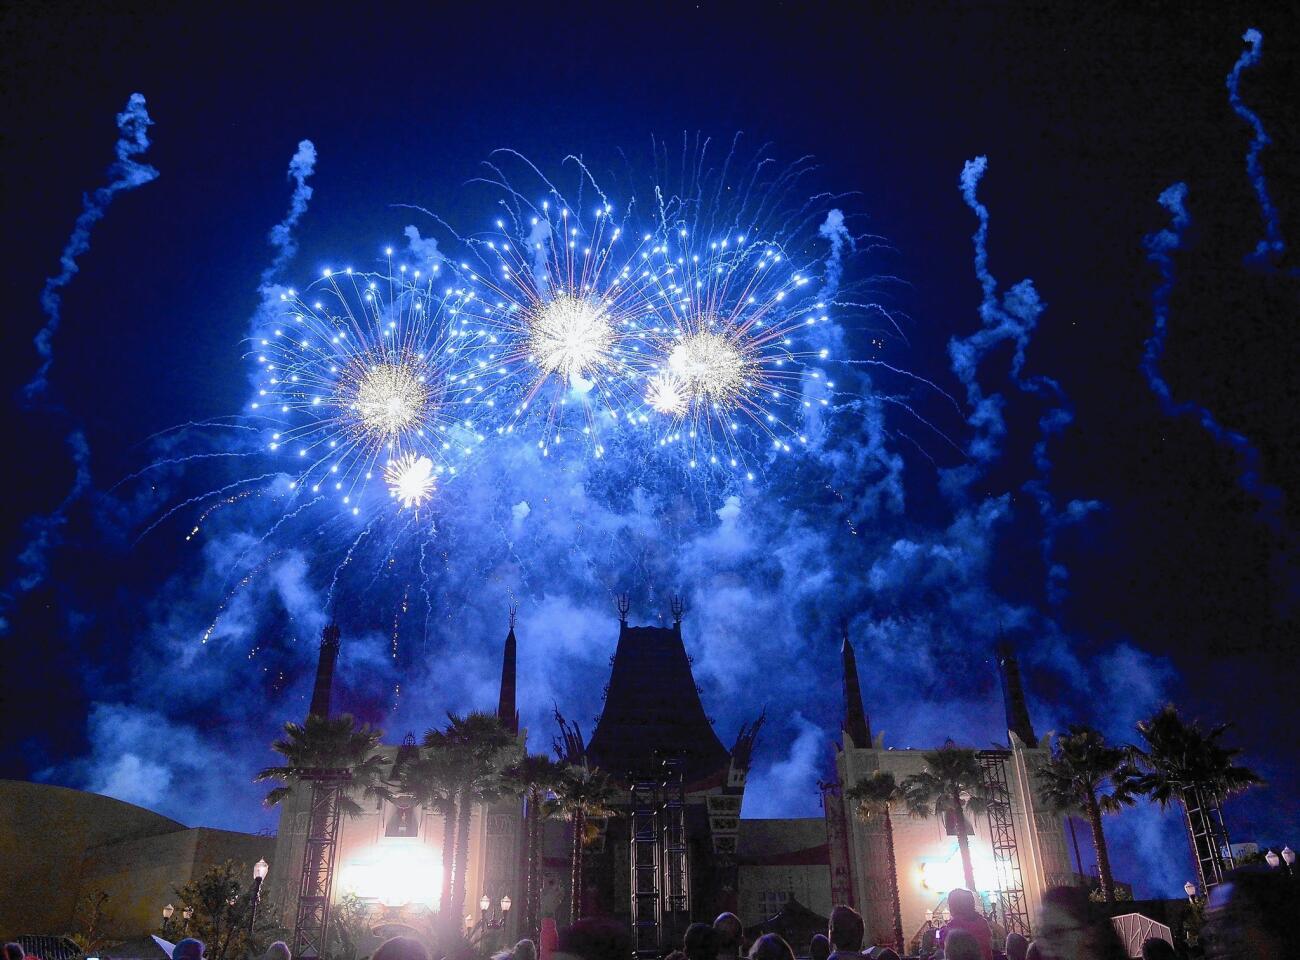 "Symphony in the Stars: A Galactic Spectacular," shown here, will be replaced with a longer, more elaborate fireworks display when "Star Wars: A Galactic Spectacular" debuts this summer.